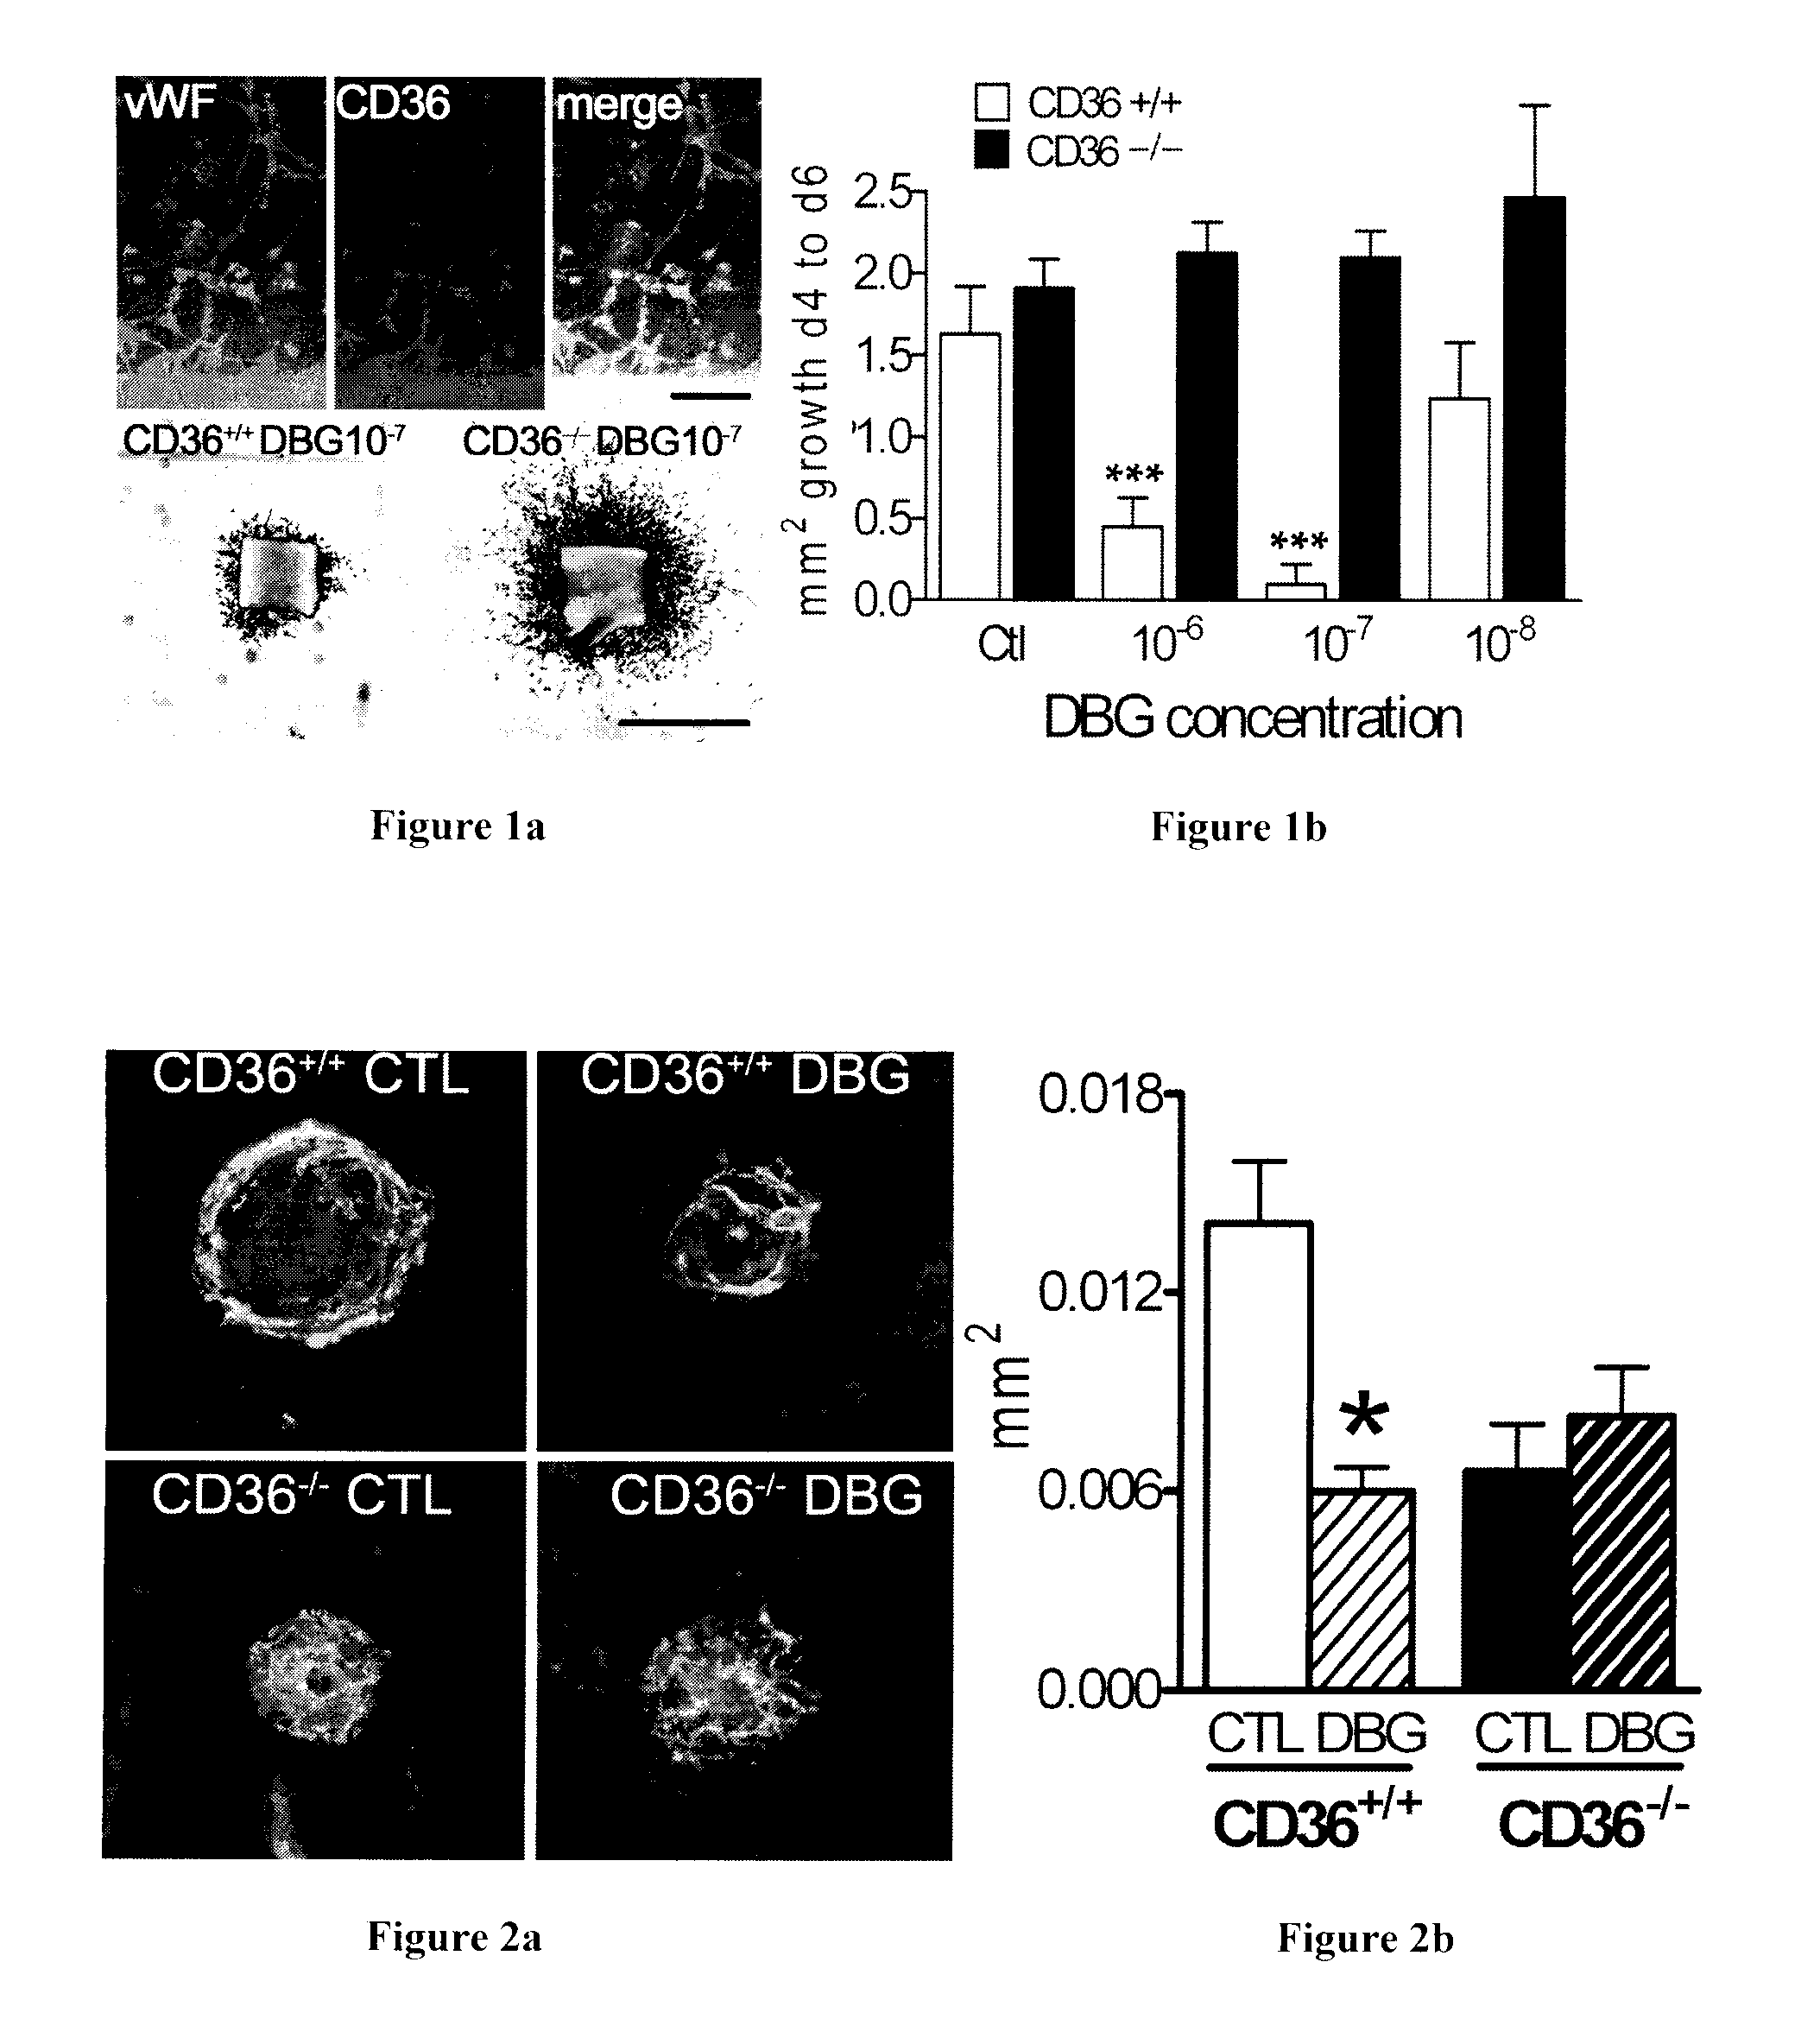 Azapeptides as cd36 binding compounds